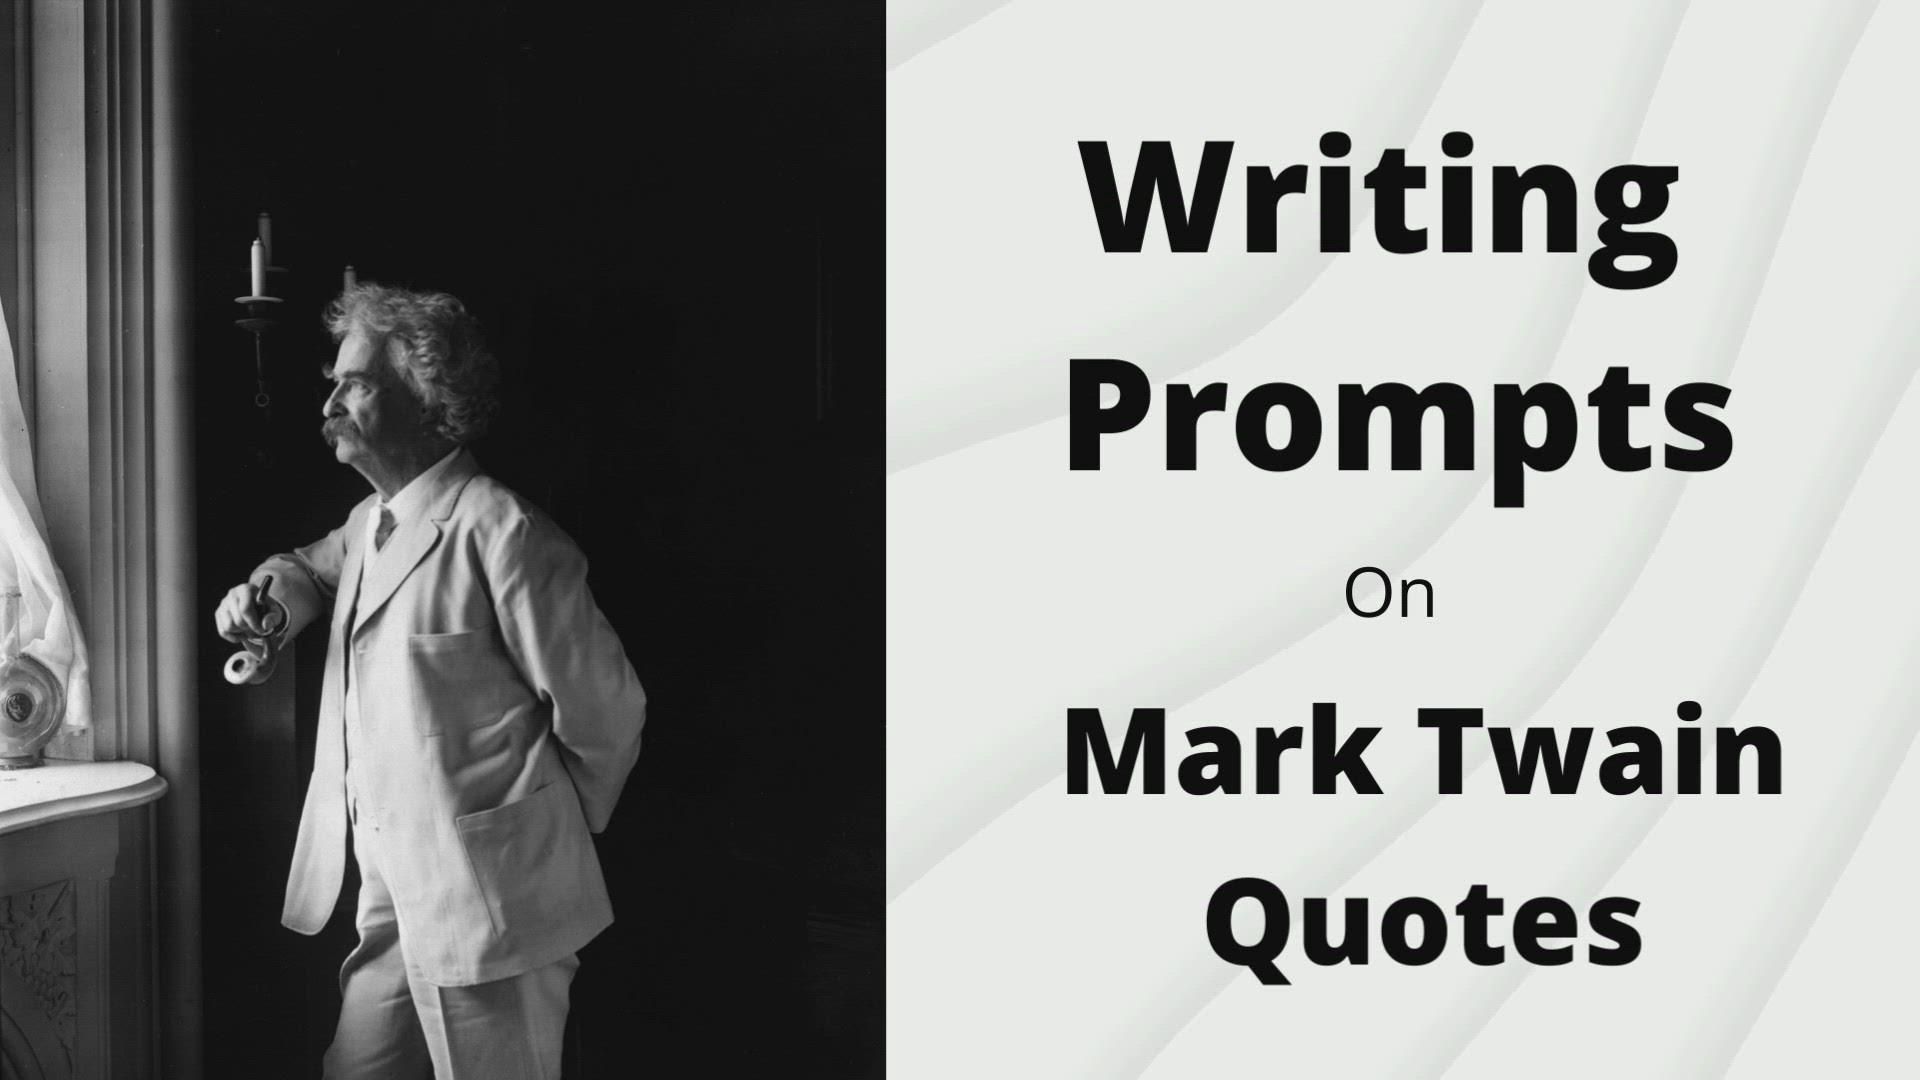 'Video thumbnail for Writing Prompts on Mark Twain Quotes'